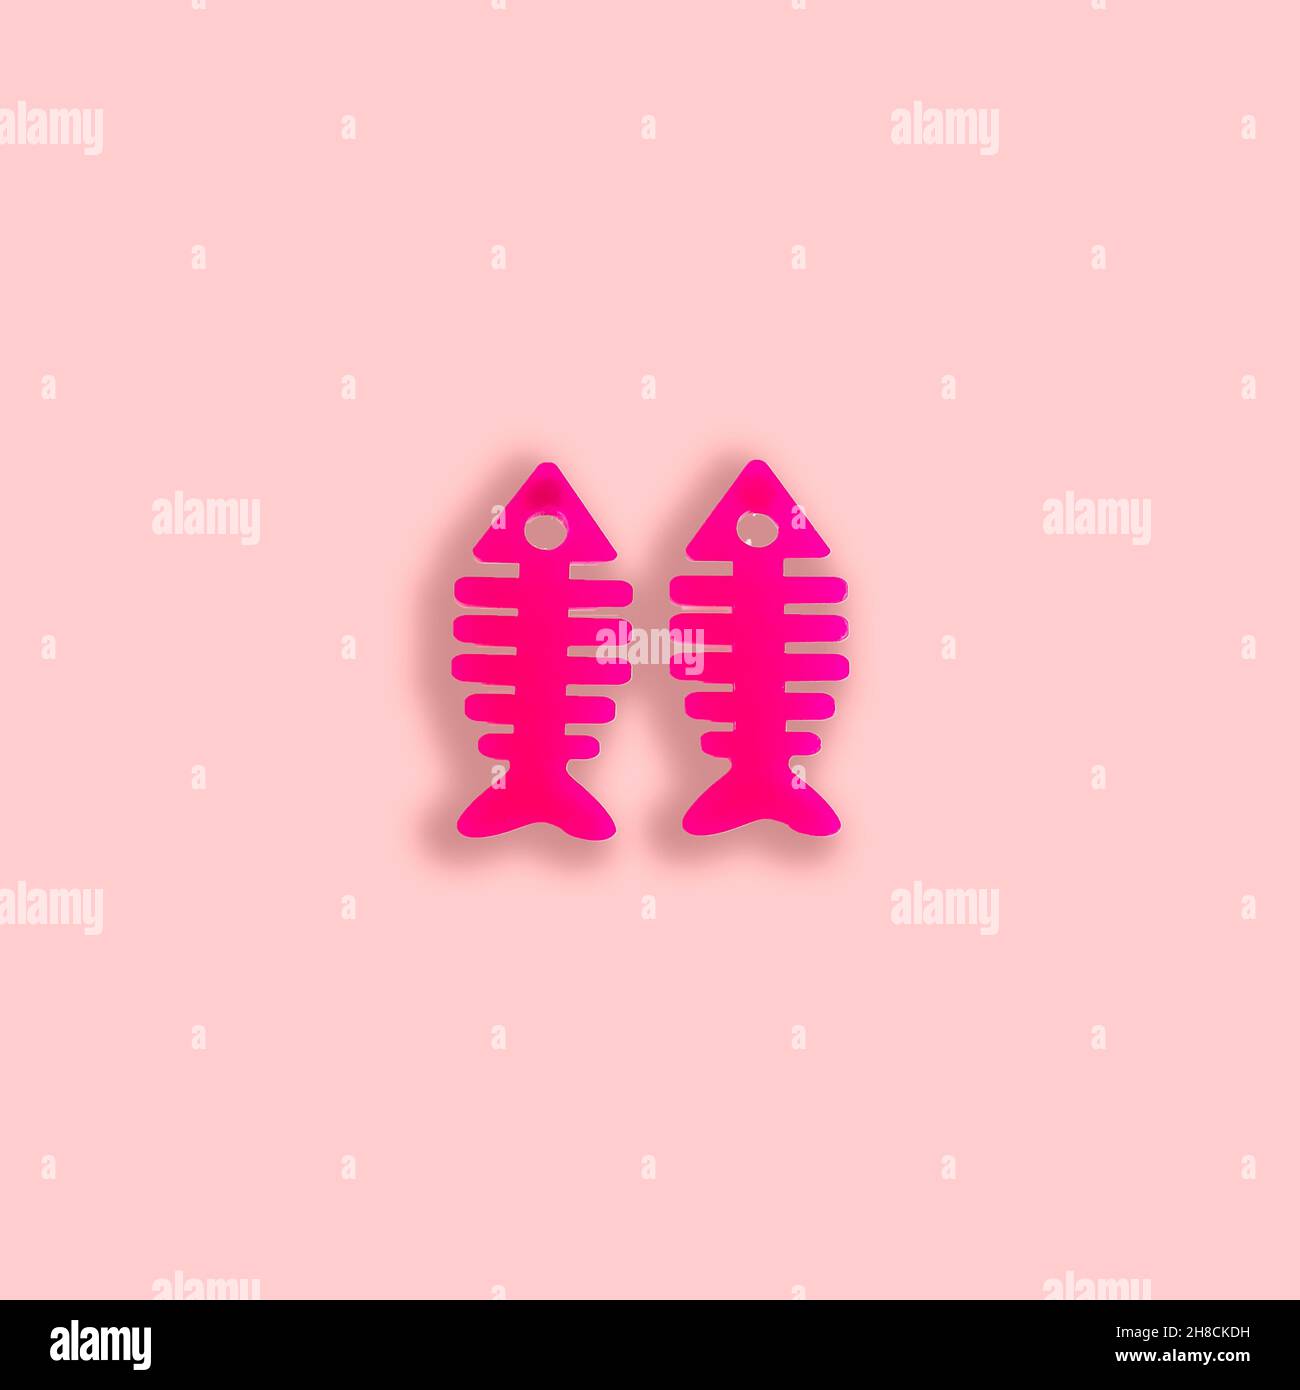 Material methacrylate with a fish shape design on a pastel color background. Stock Photo